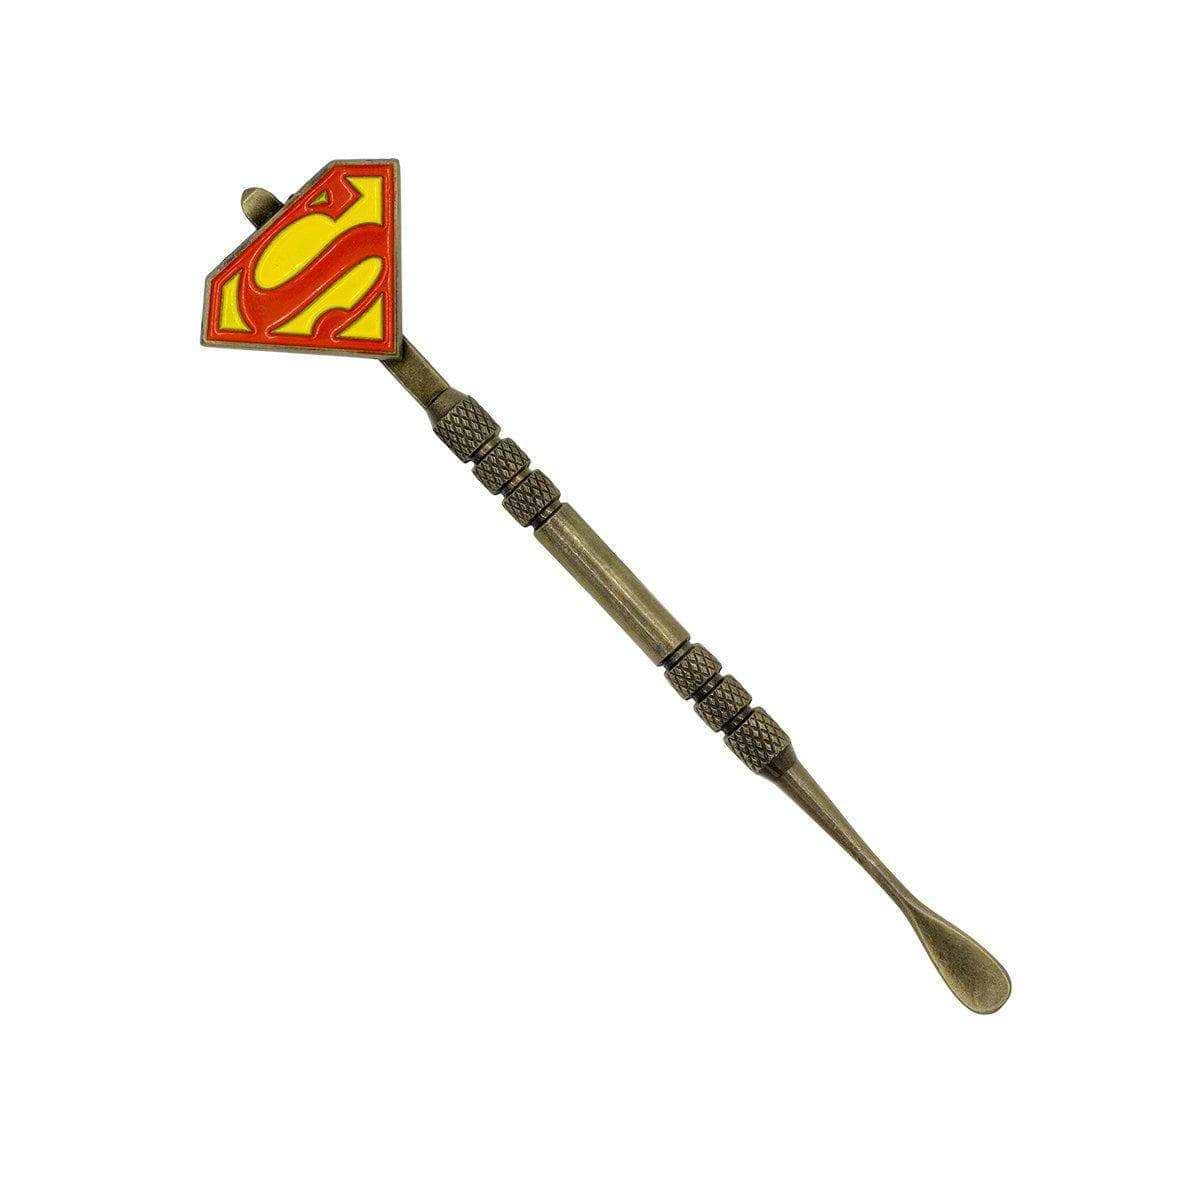 Handy stainless steel dab tool smoking accessory textured middle part for easy grip Superman logo S design on handle